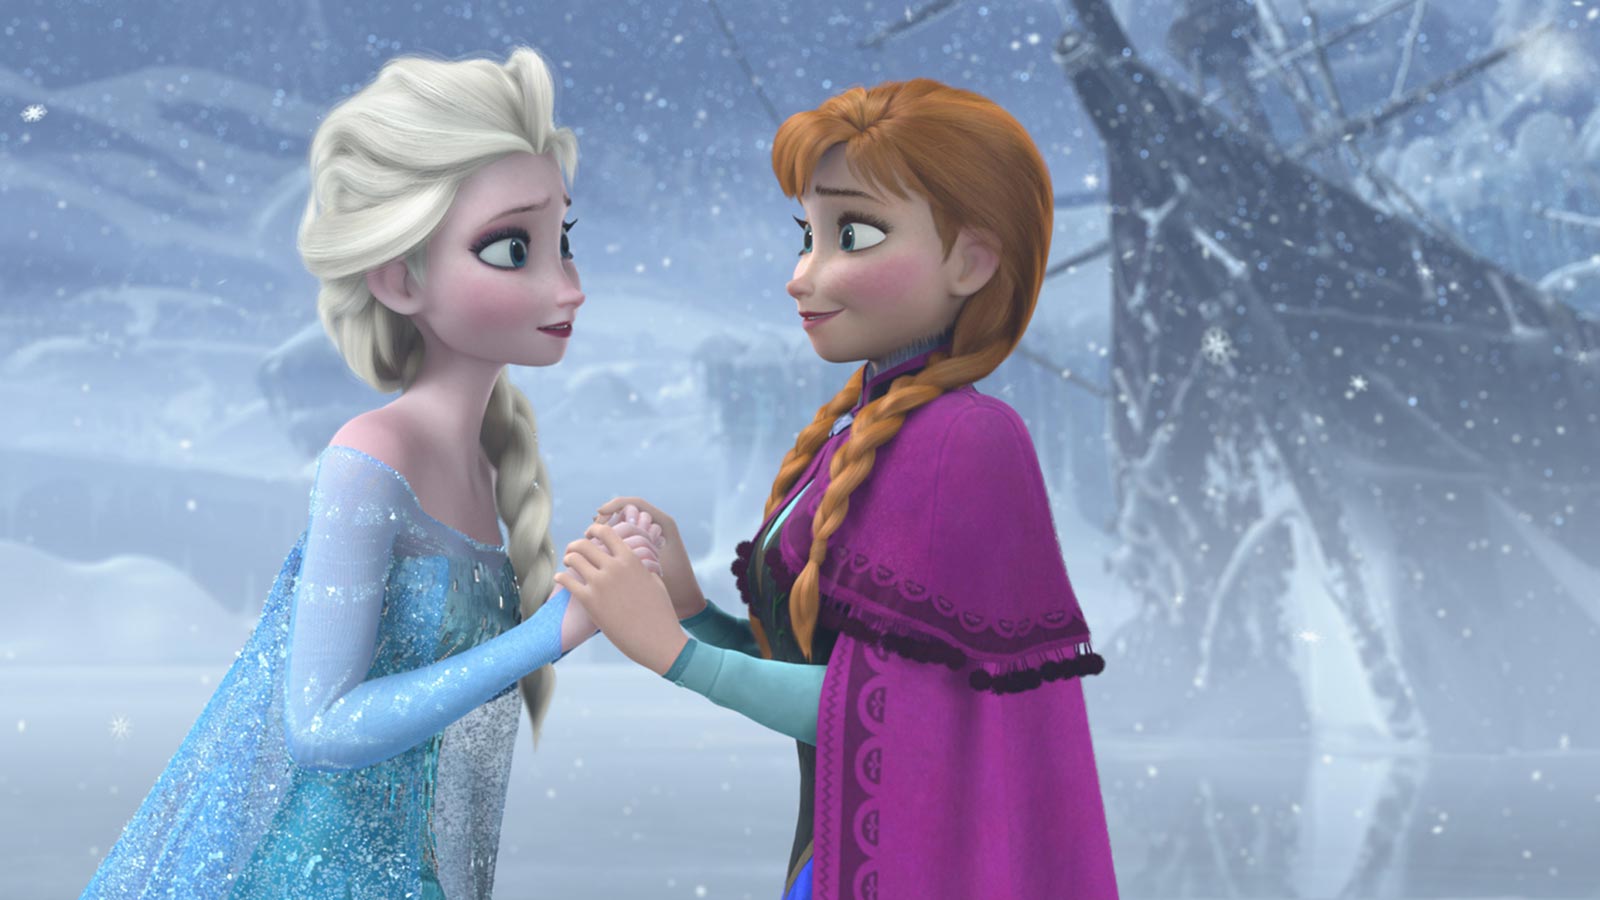 I Bet You Can’t Get 13/18 on This General Knowledge Quiz (feat. Disney) Frozen movie